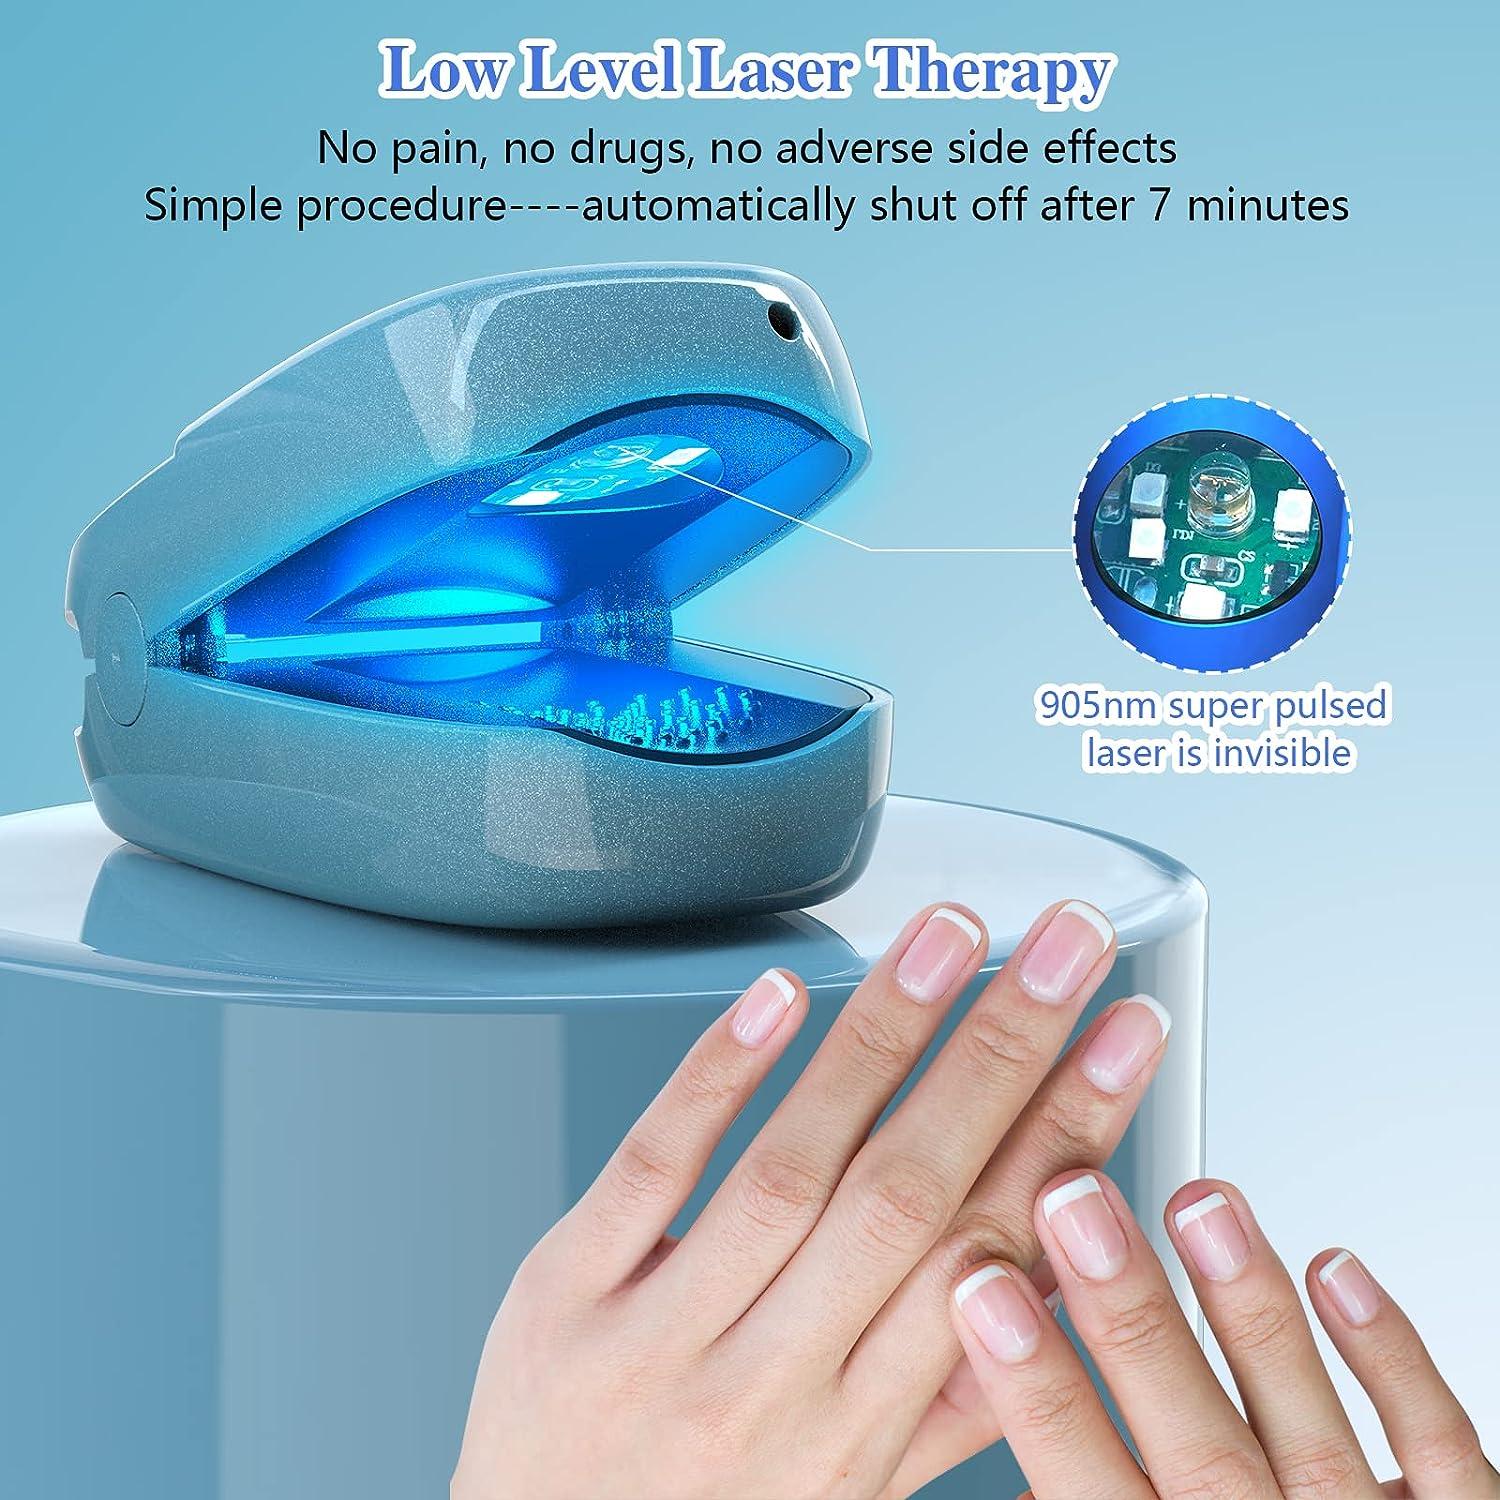 Hot Laser Therapy Adelaide | Adelaide Fungal Nail Clinic